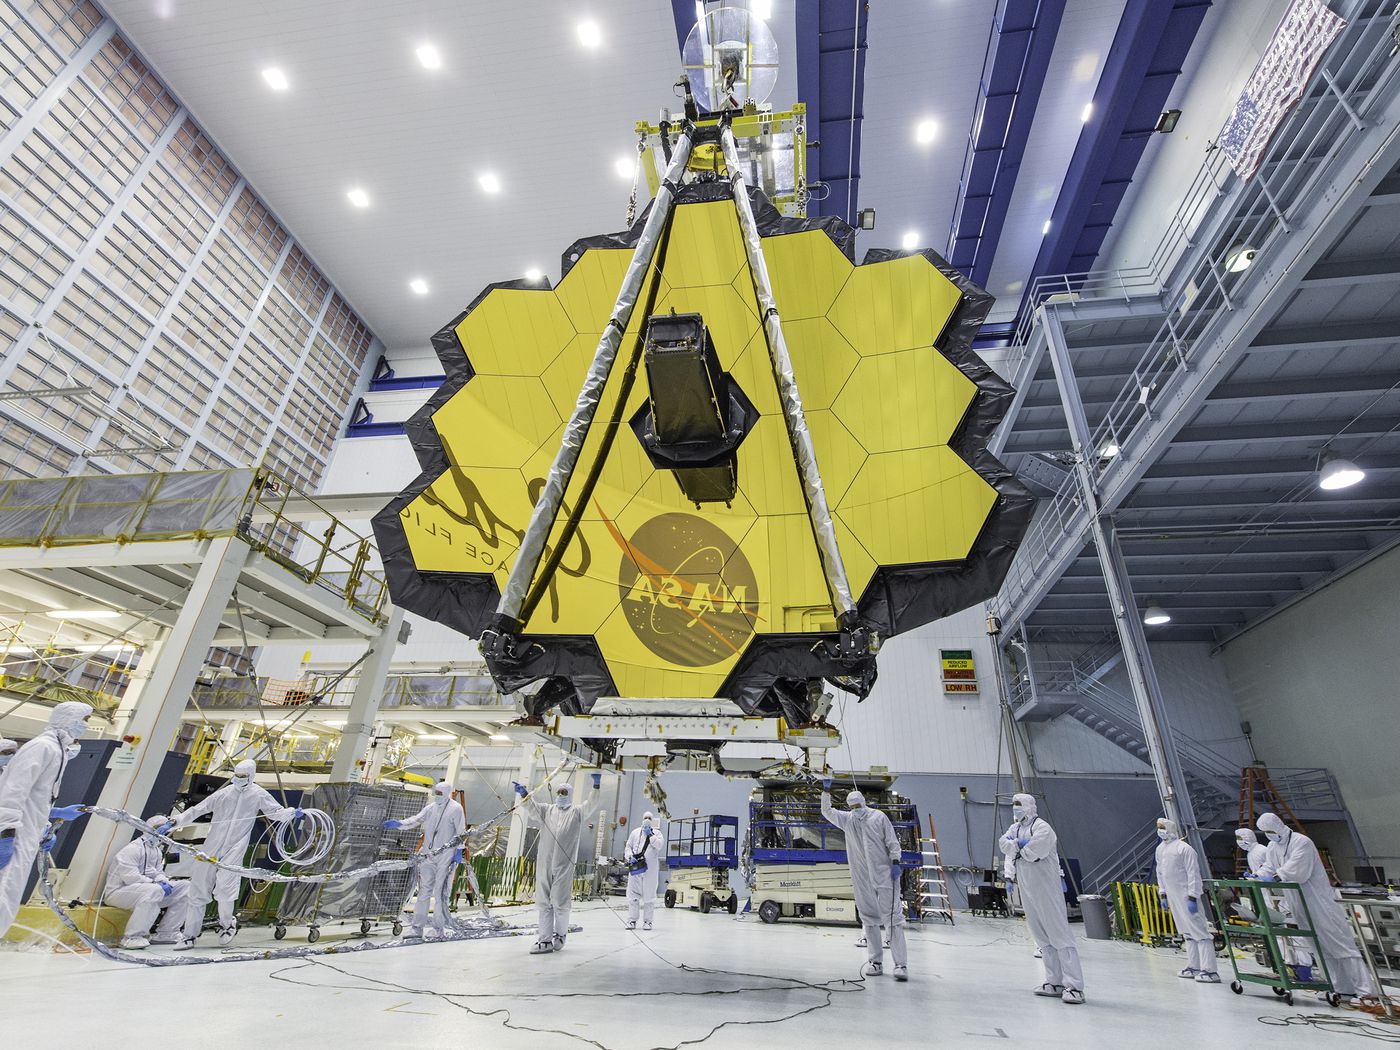 Involvement of the James Webb Space Telescope in a mission beyond its capacity